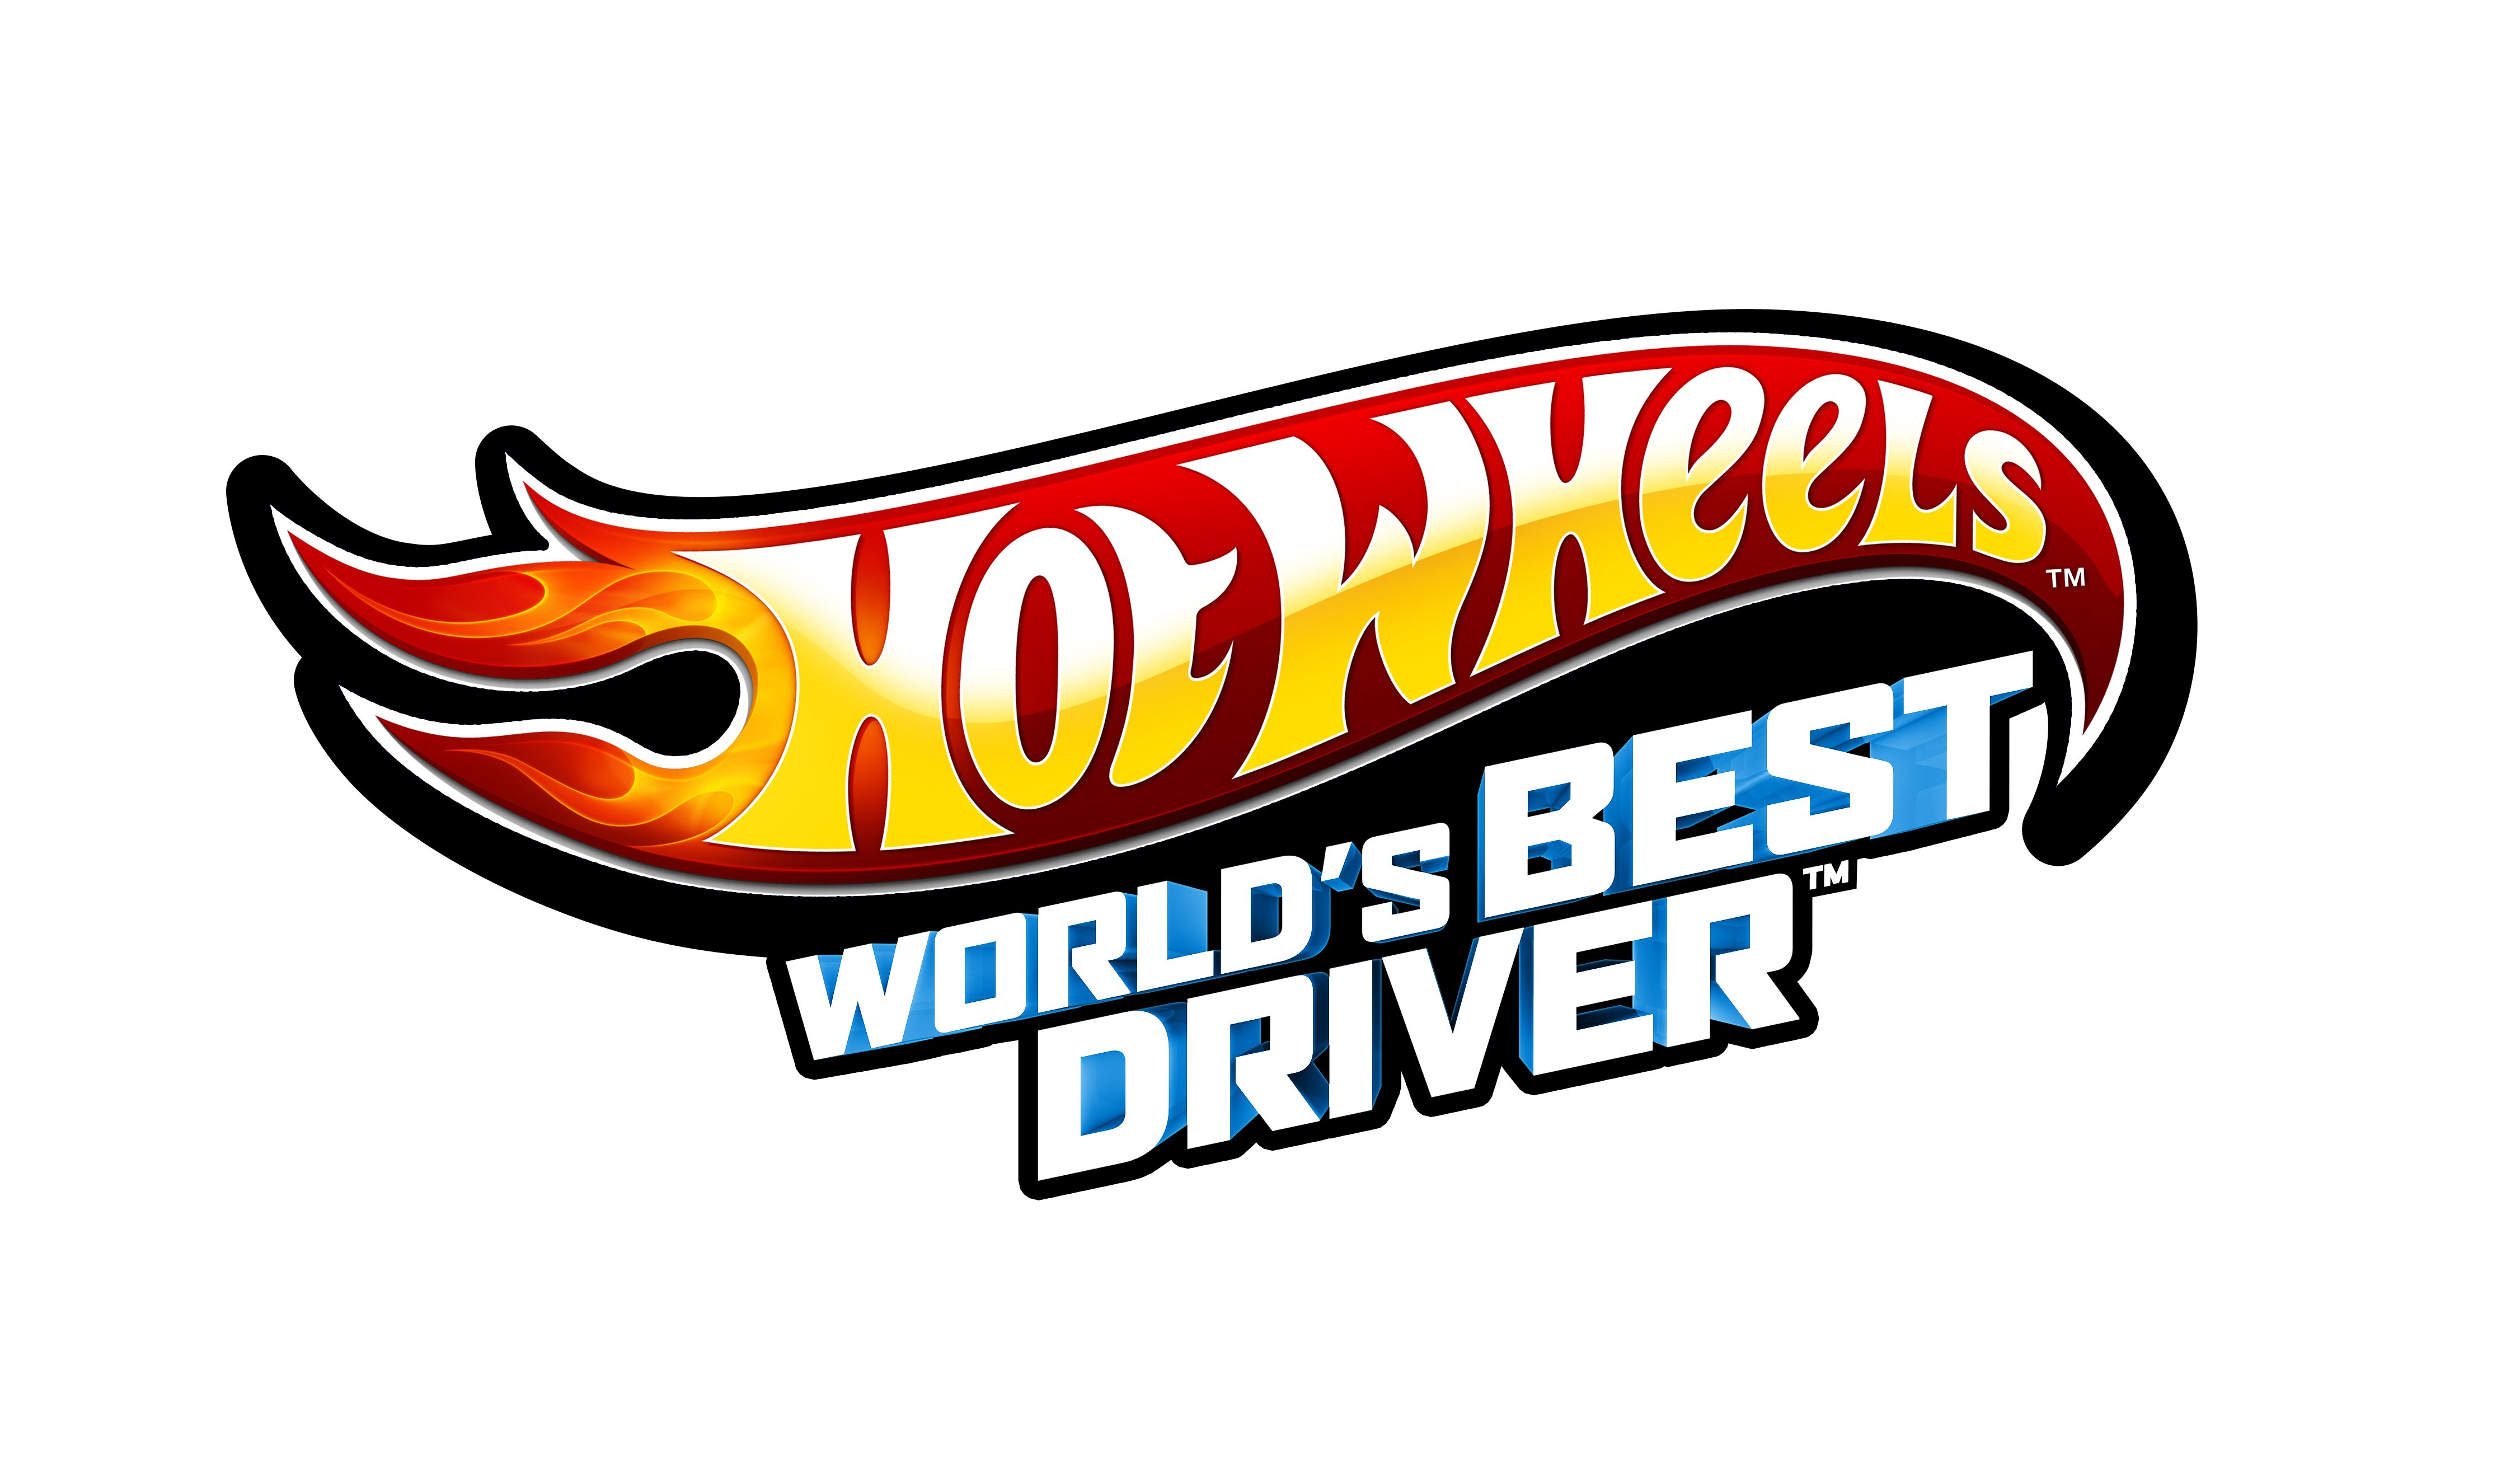 hot wheels, Rod, Rods, Toy, Toys, Race, Racing, Hot, Wheels Wallpaper